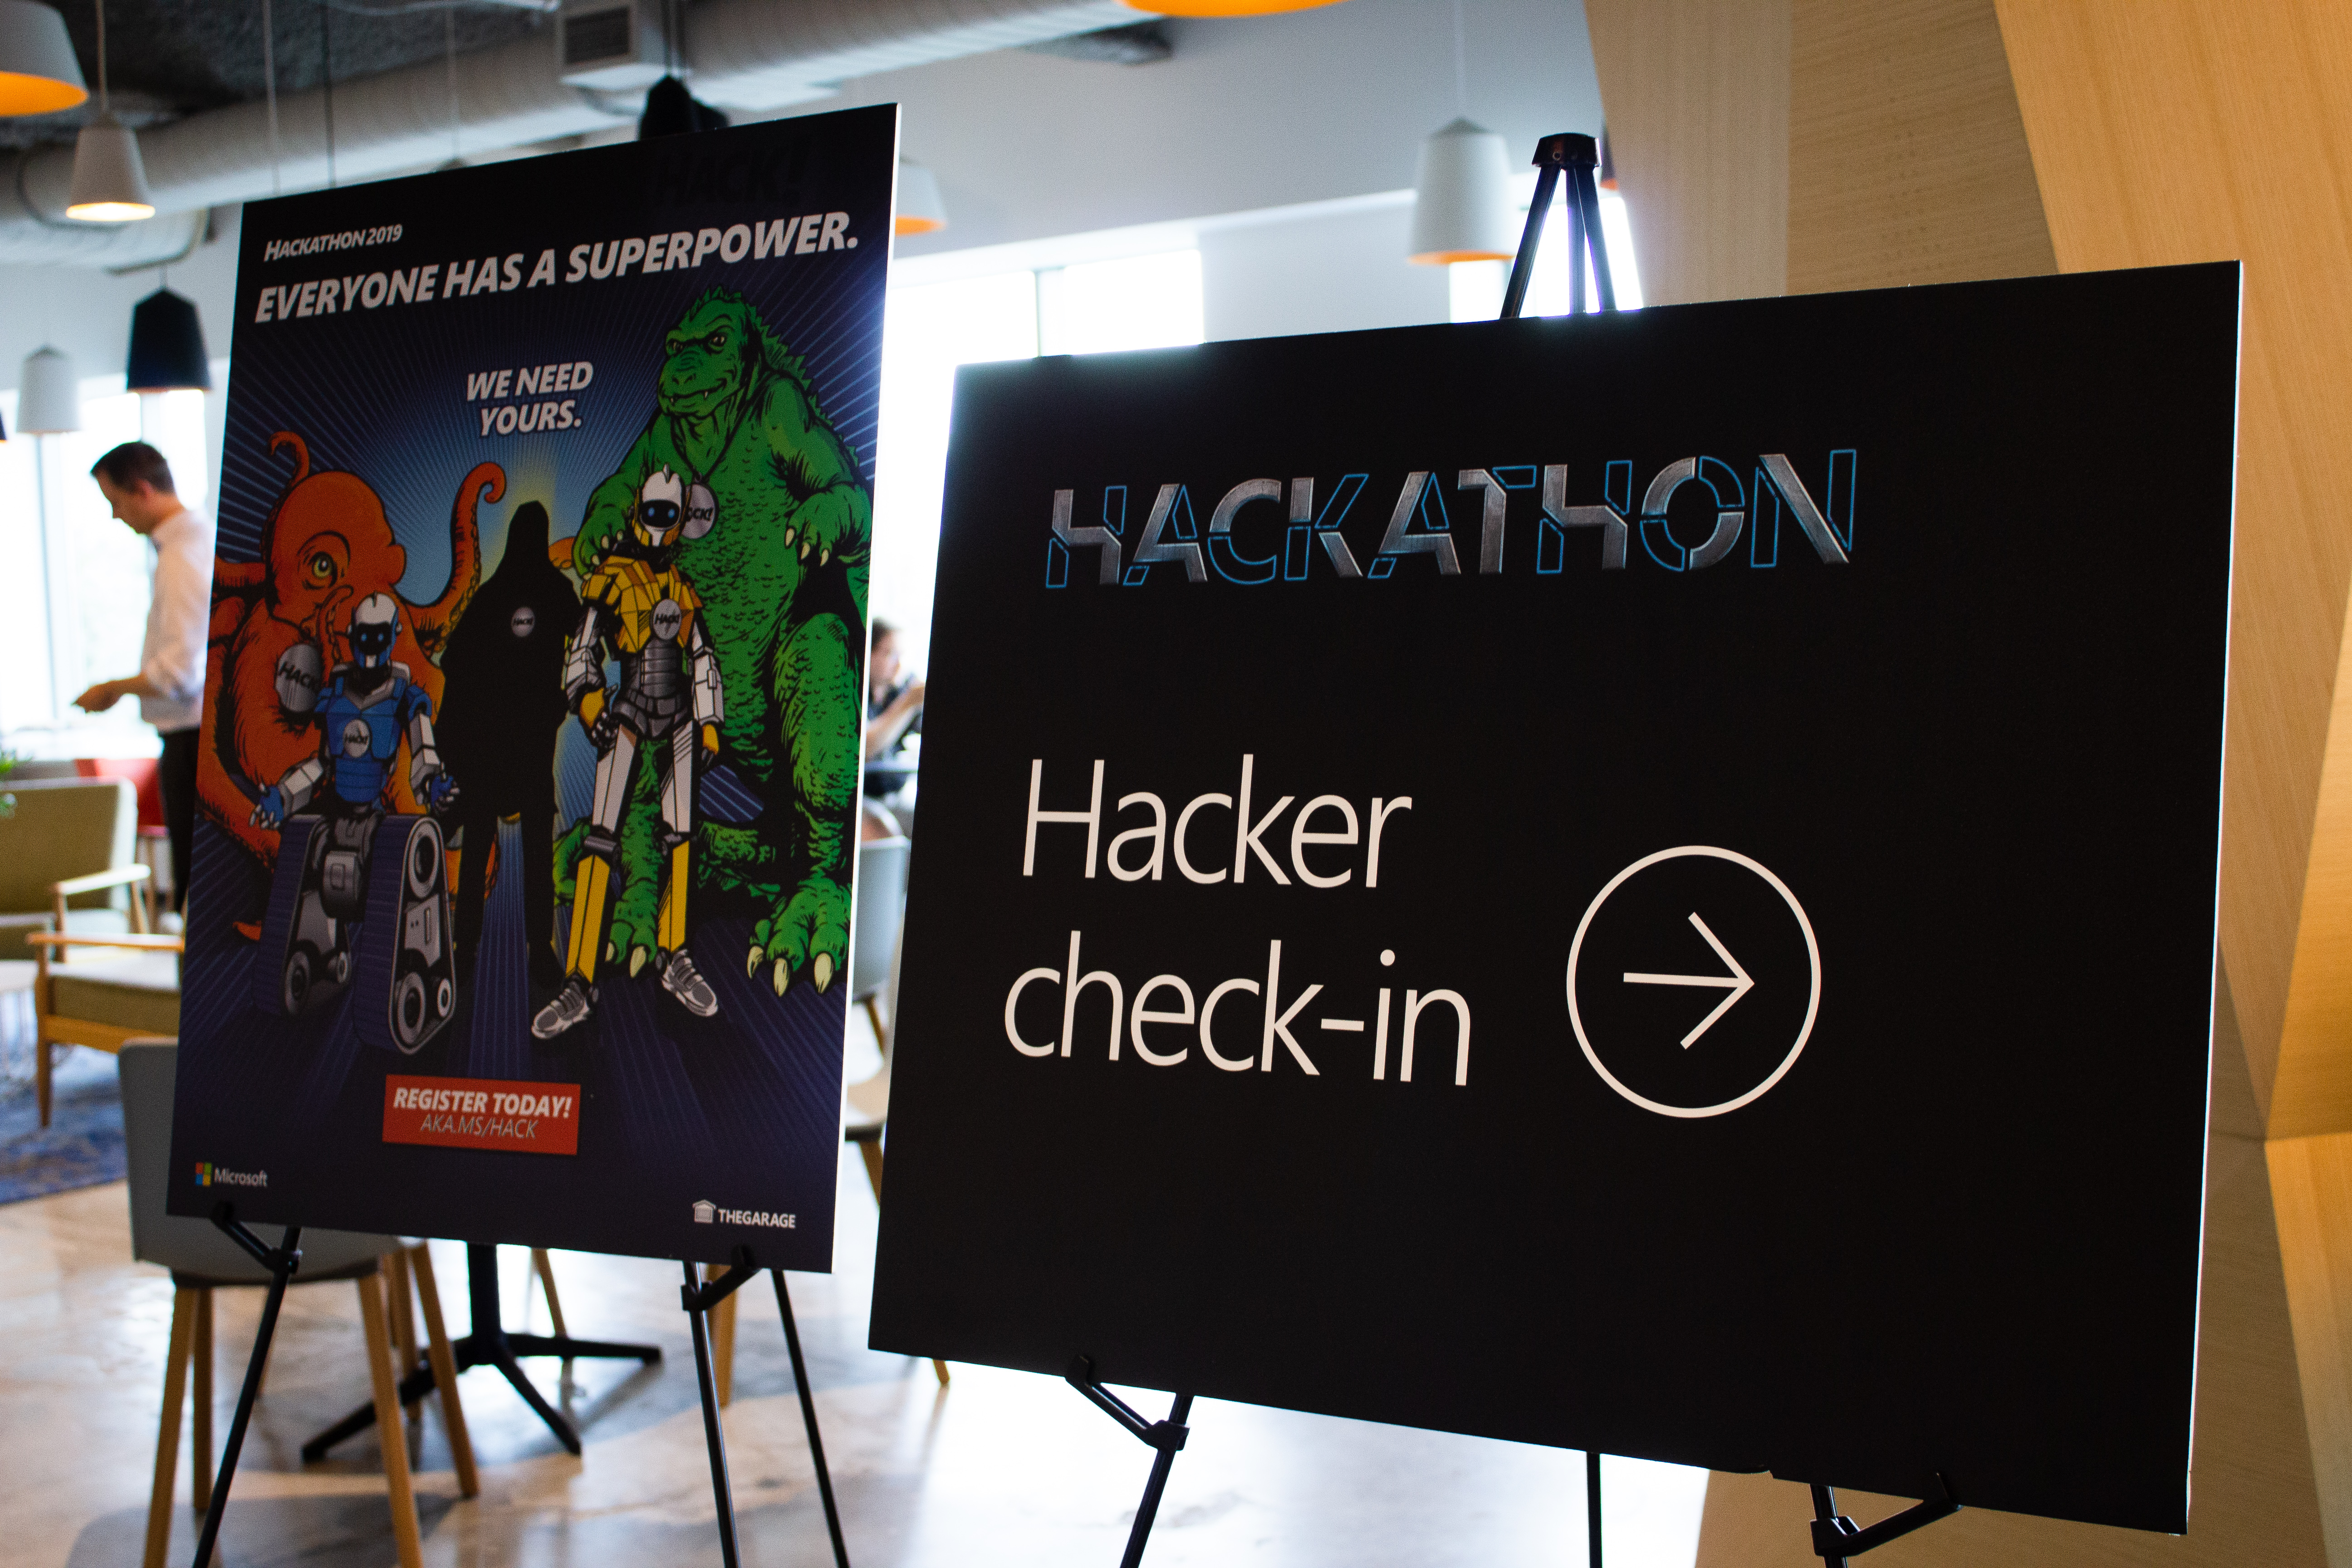 A sign welcoming hackers to Microsoft's Hackathon